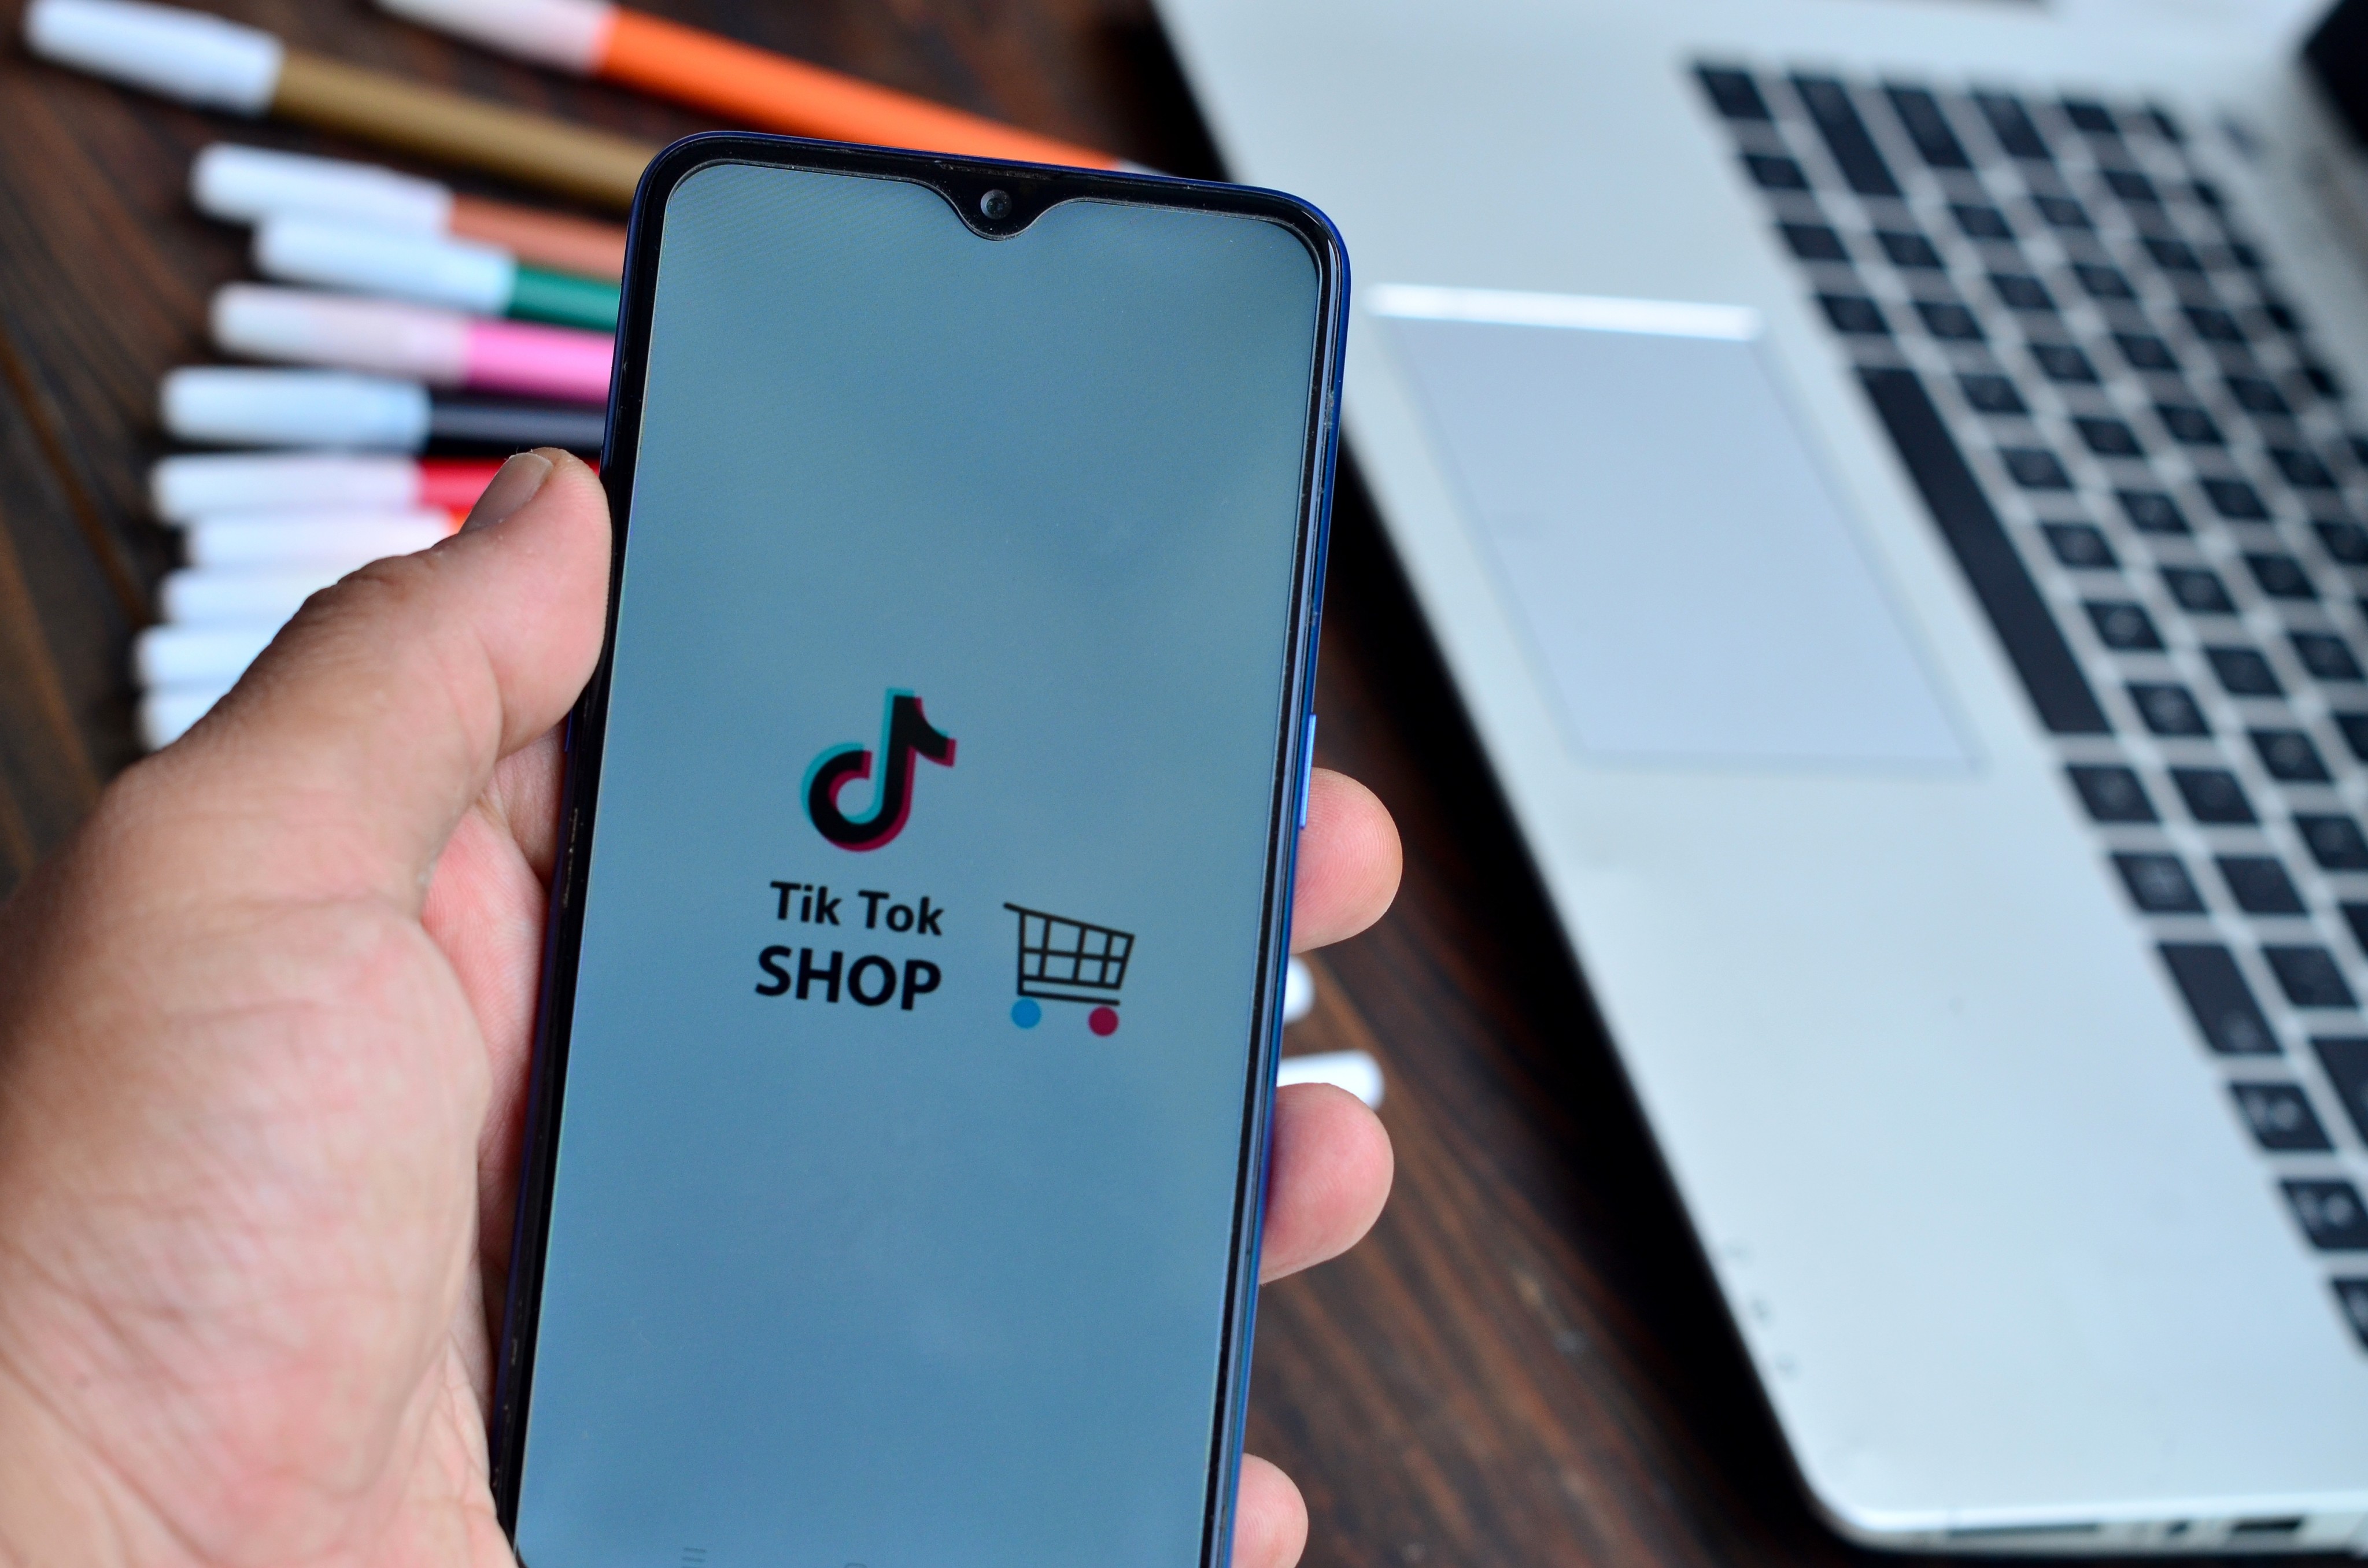 The TikTok Shop platform is displayed on a user’s smartphone in Bekasi, a city in the Indonesian province of West Java, on May 6, 2023. Photo: Shutterstock